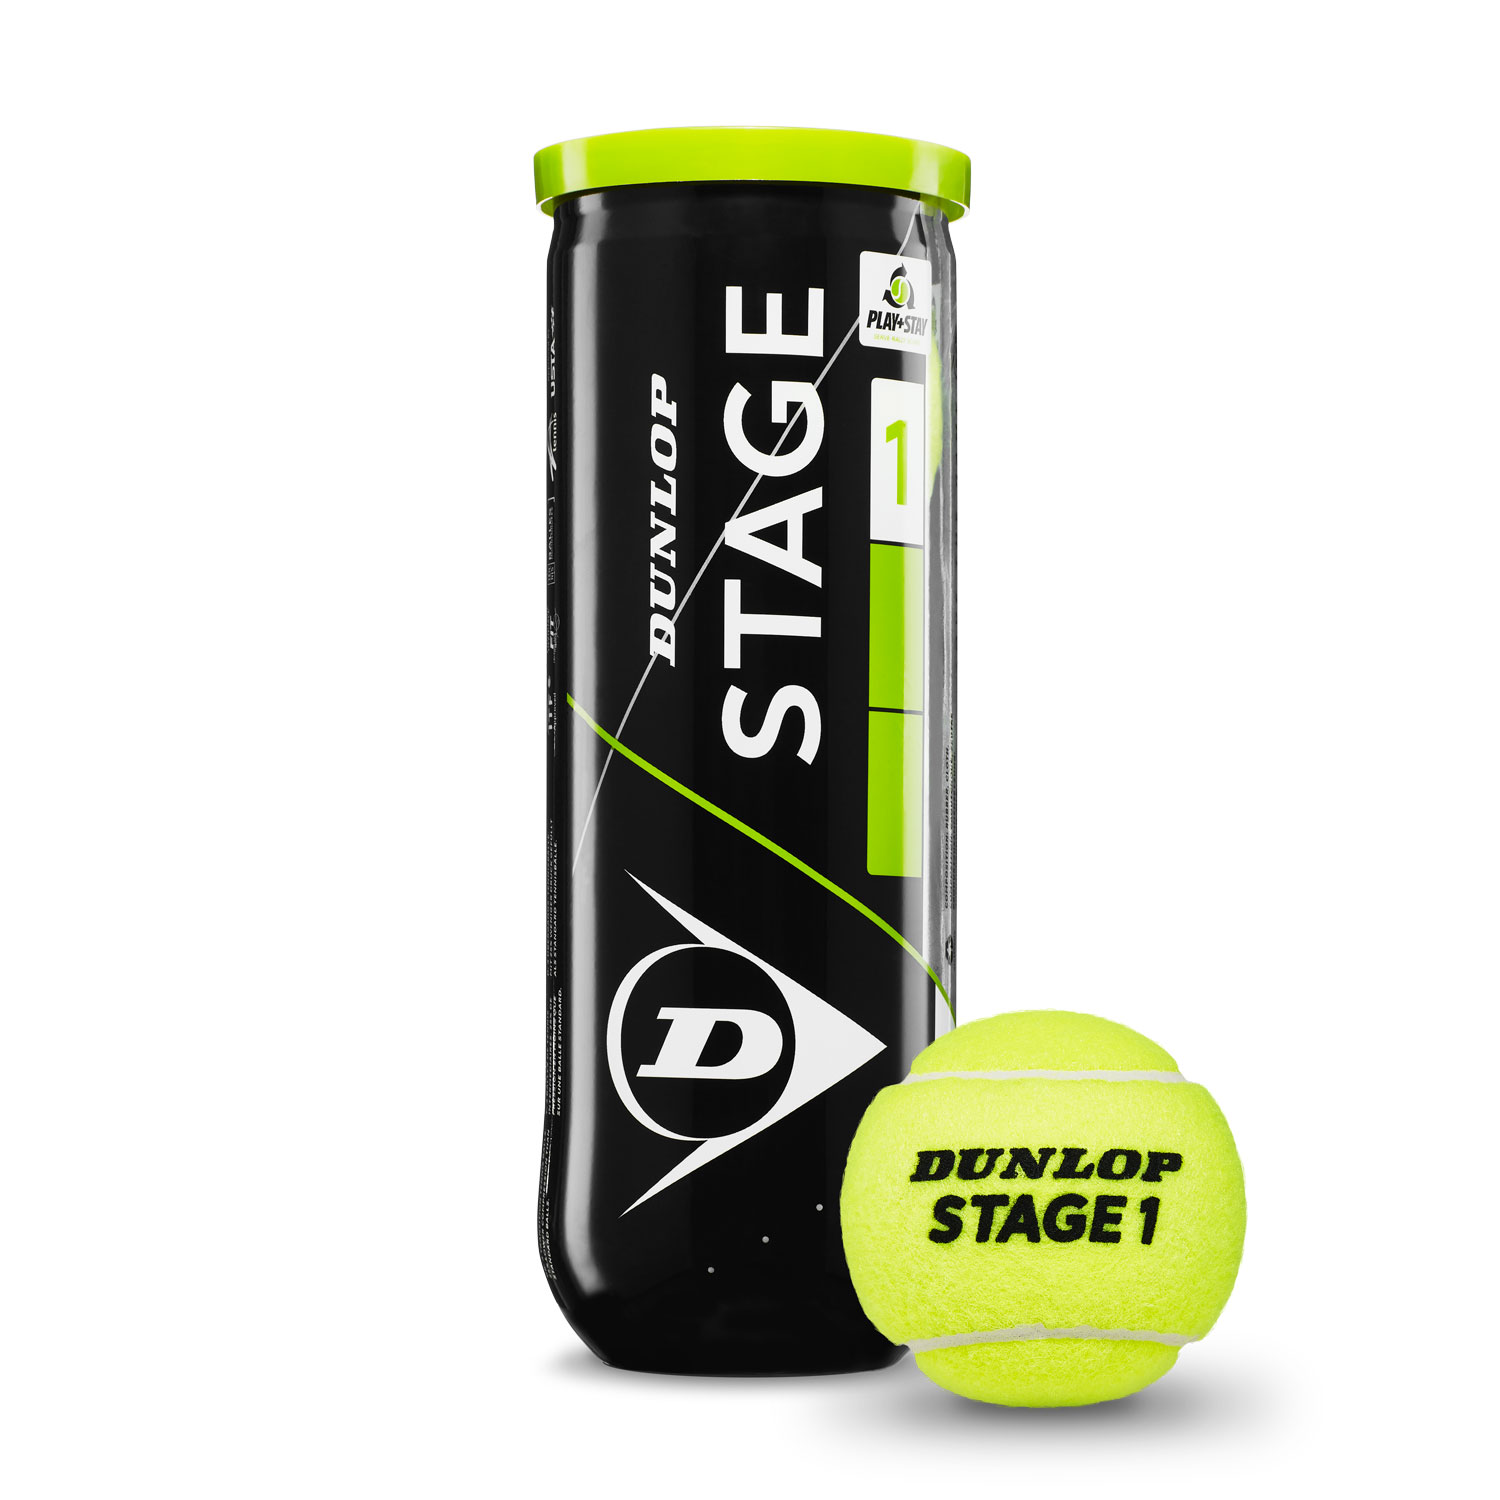 Dunlop Stage 1 Green - 3 Ball Can